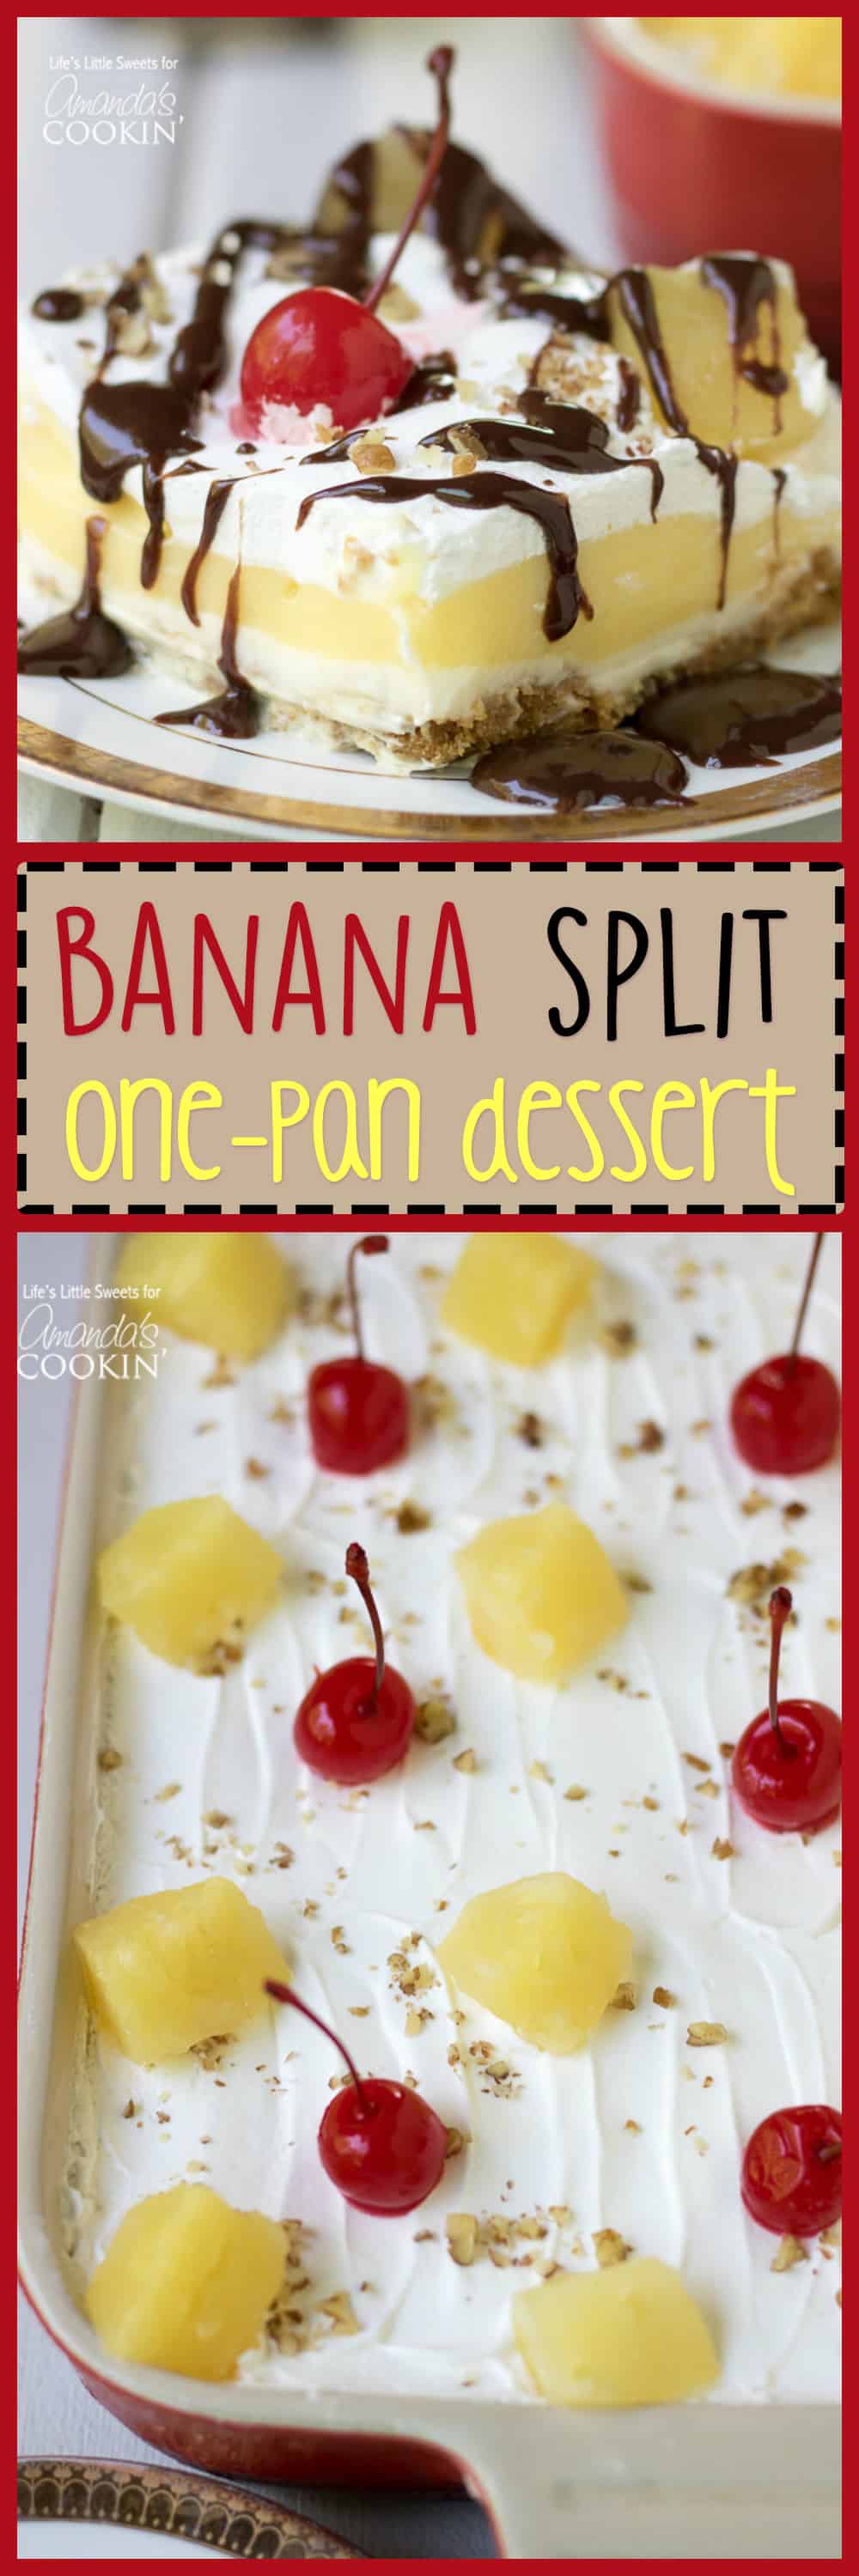 pinterest image with text - over head of dessert pan